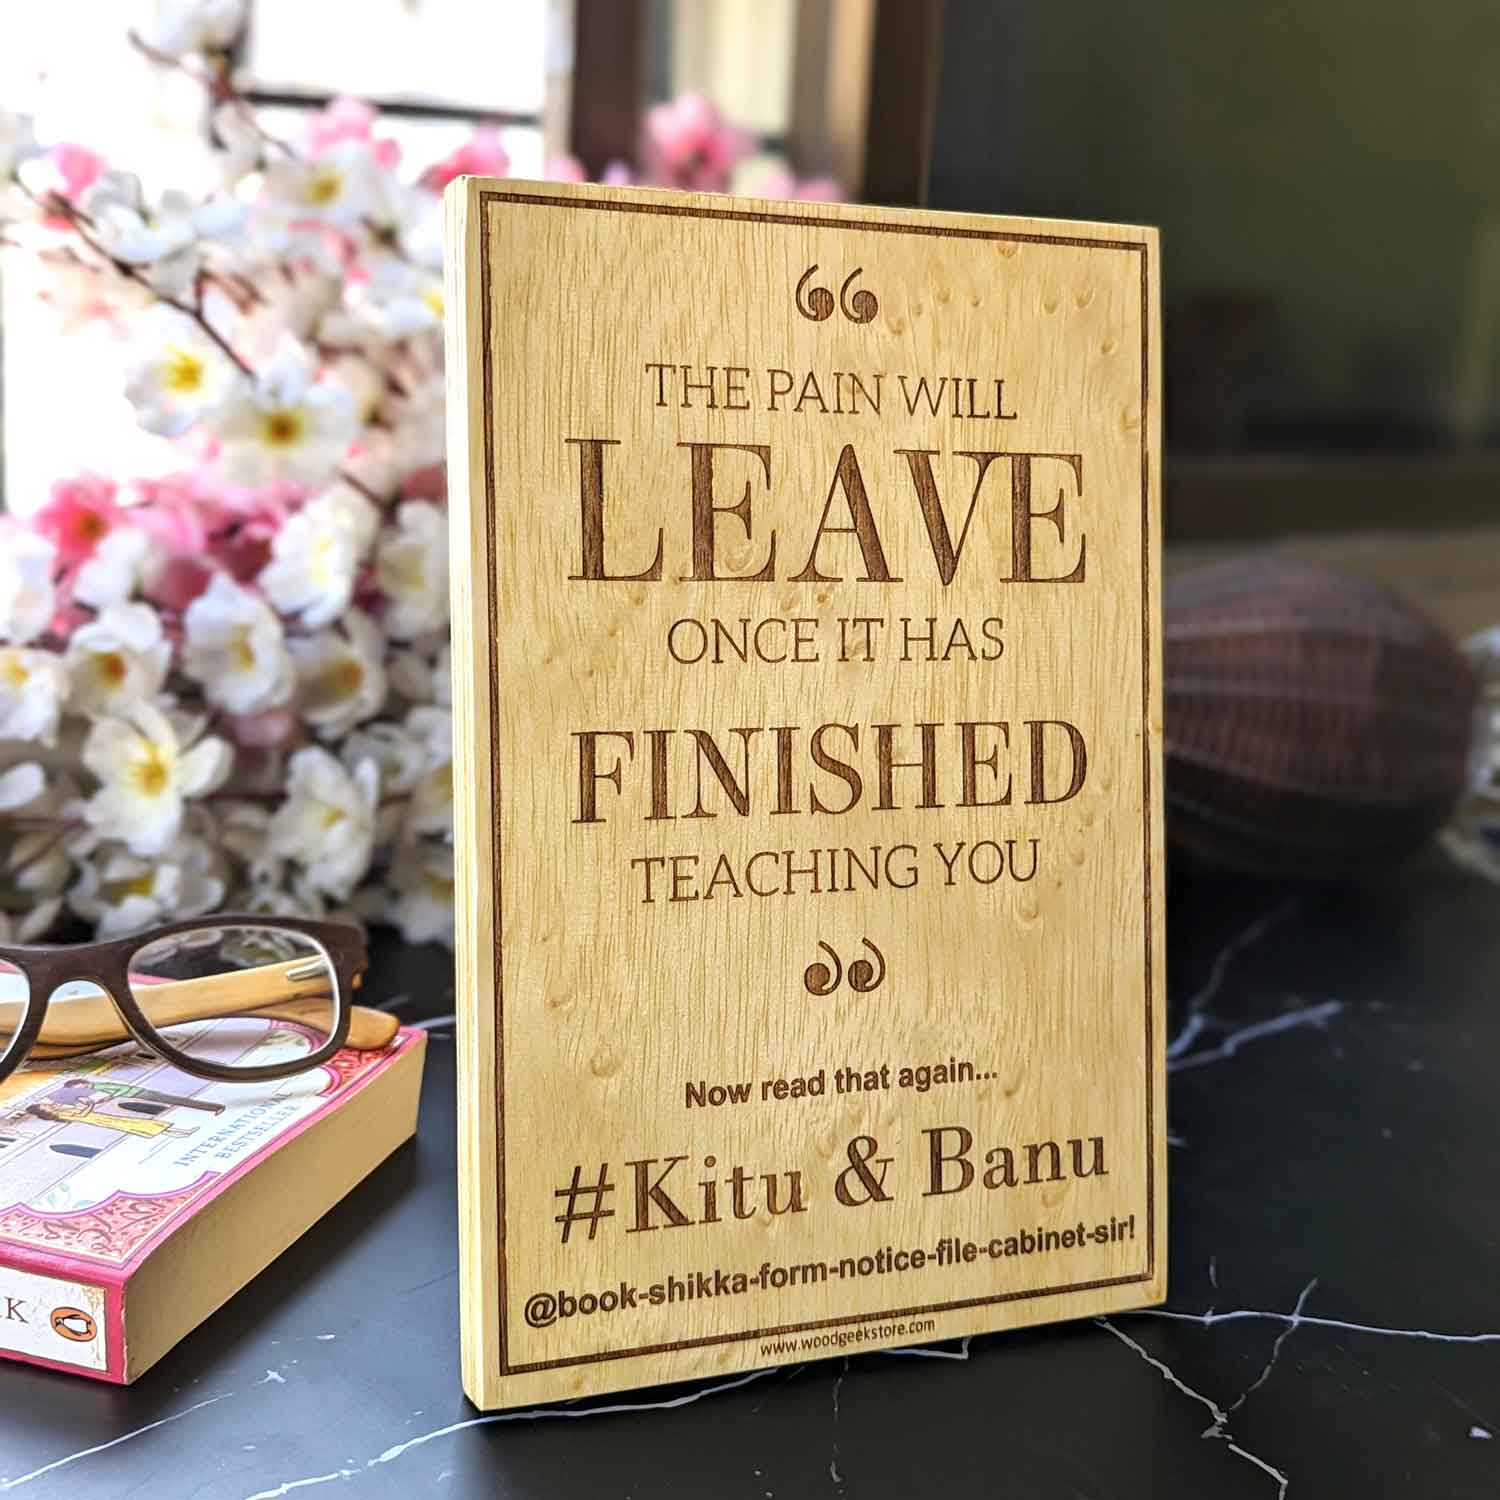 The Pain Will Leave Once It Has Finished Teaching You - Engraved Inspirational Quote Wooden Frame